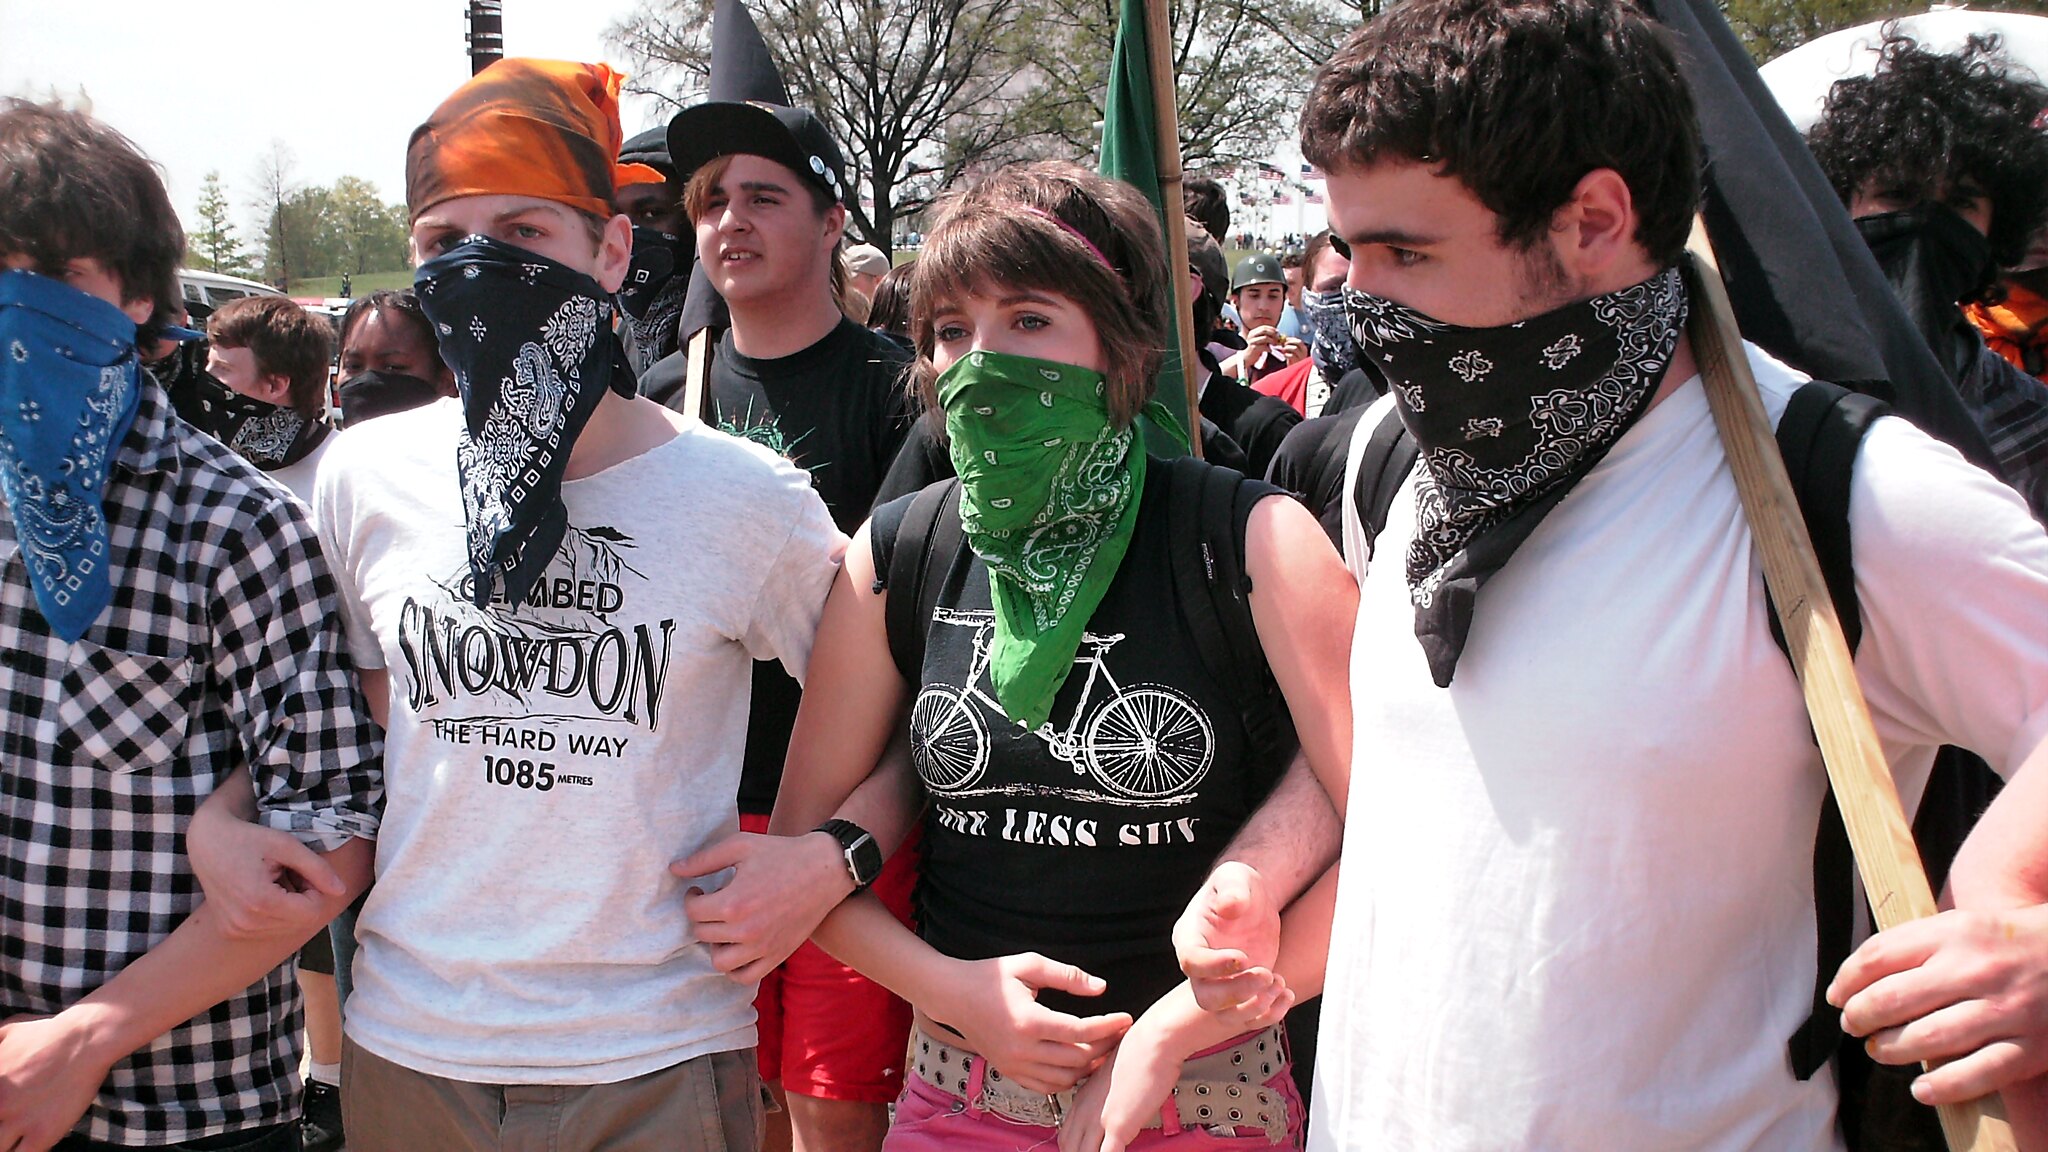 A group of masked demonstrators marches with arms locked at a demonstration on April 19, 2008 in Washington, DC